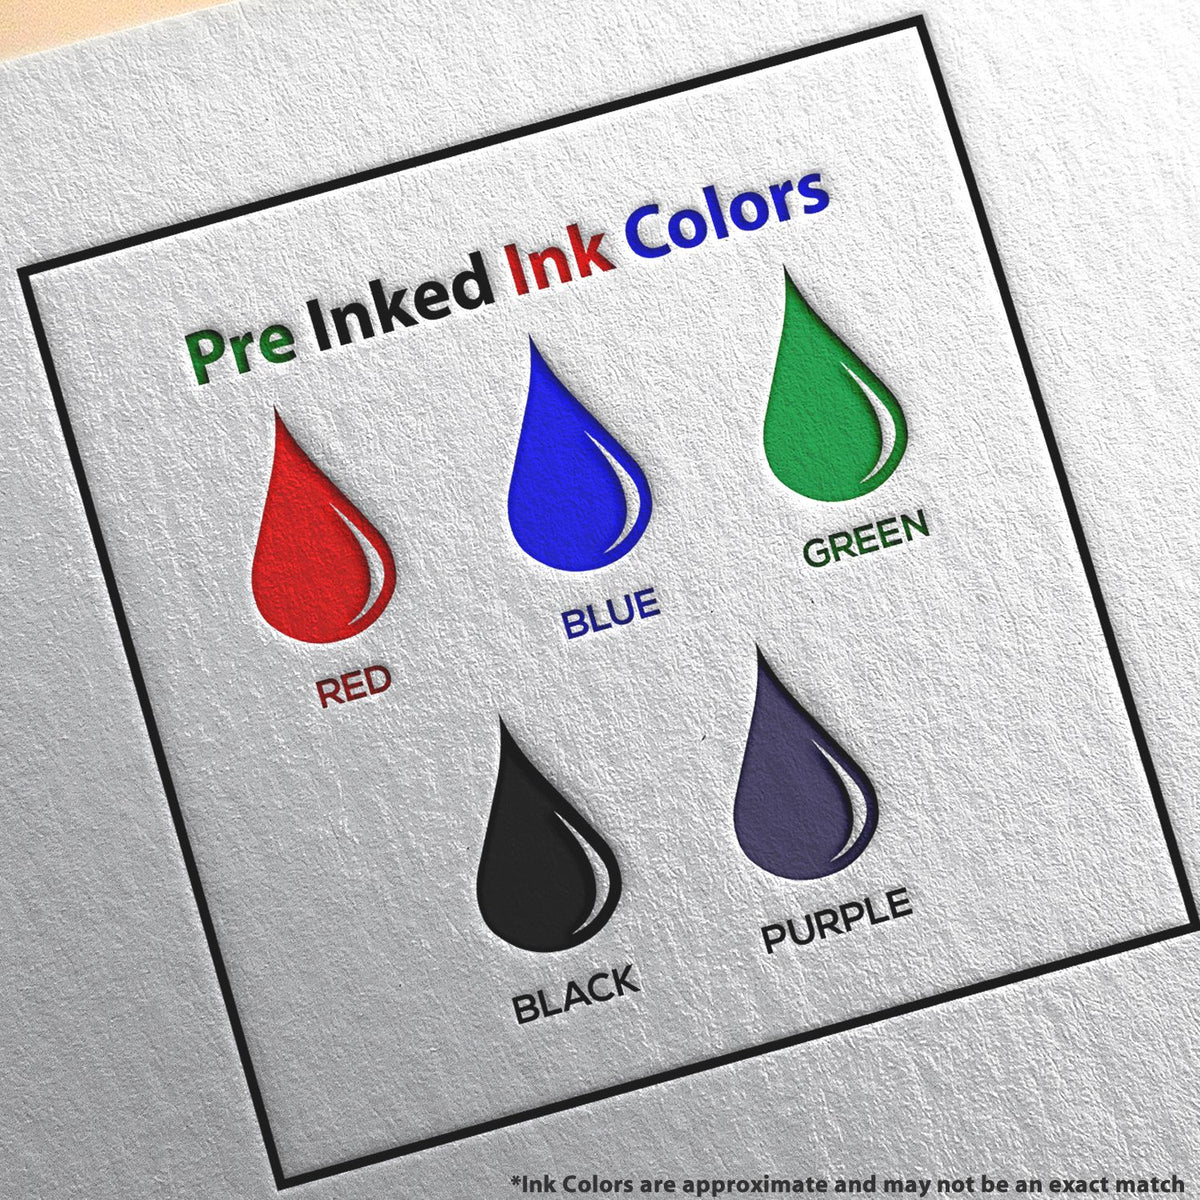 A picture showing the different ink colors or hues available for the MaxLight Premium Pre-Inked Alaska State Seal Notarial Stamp product.